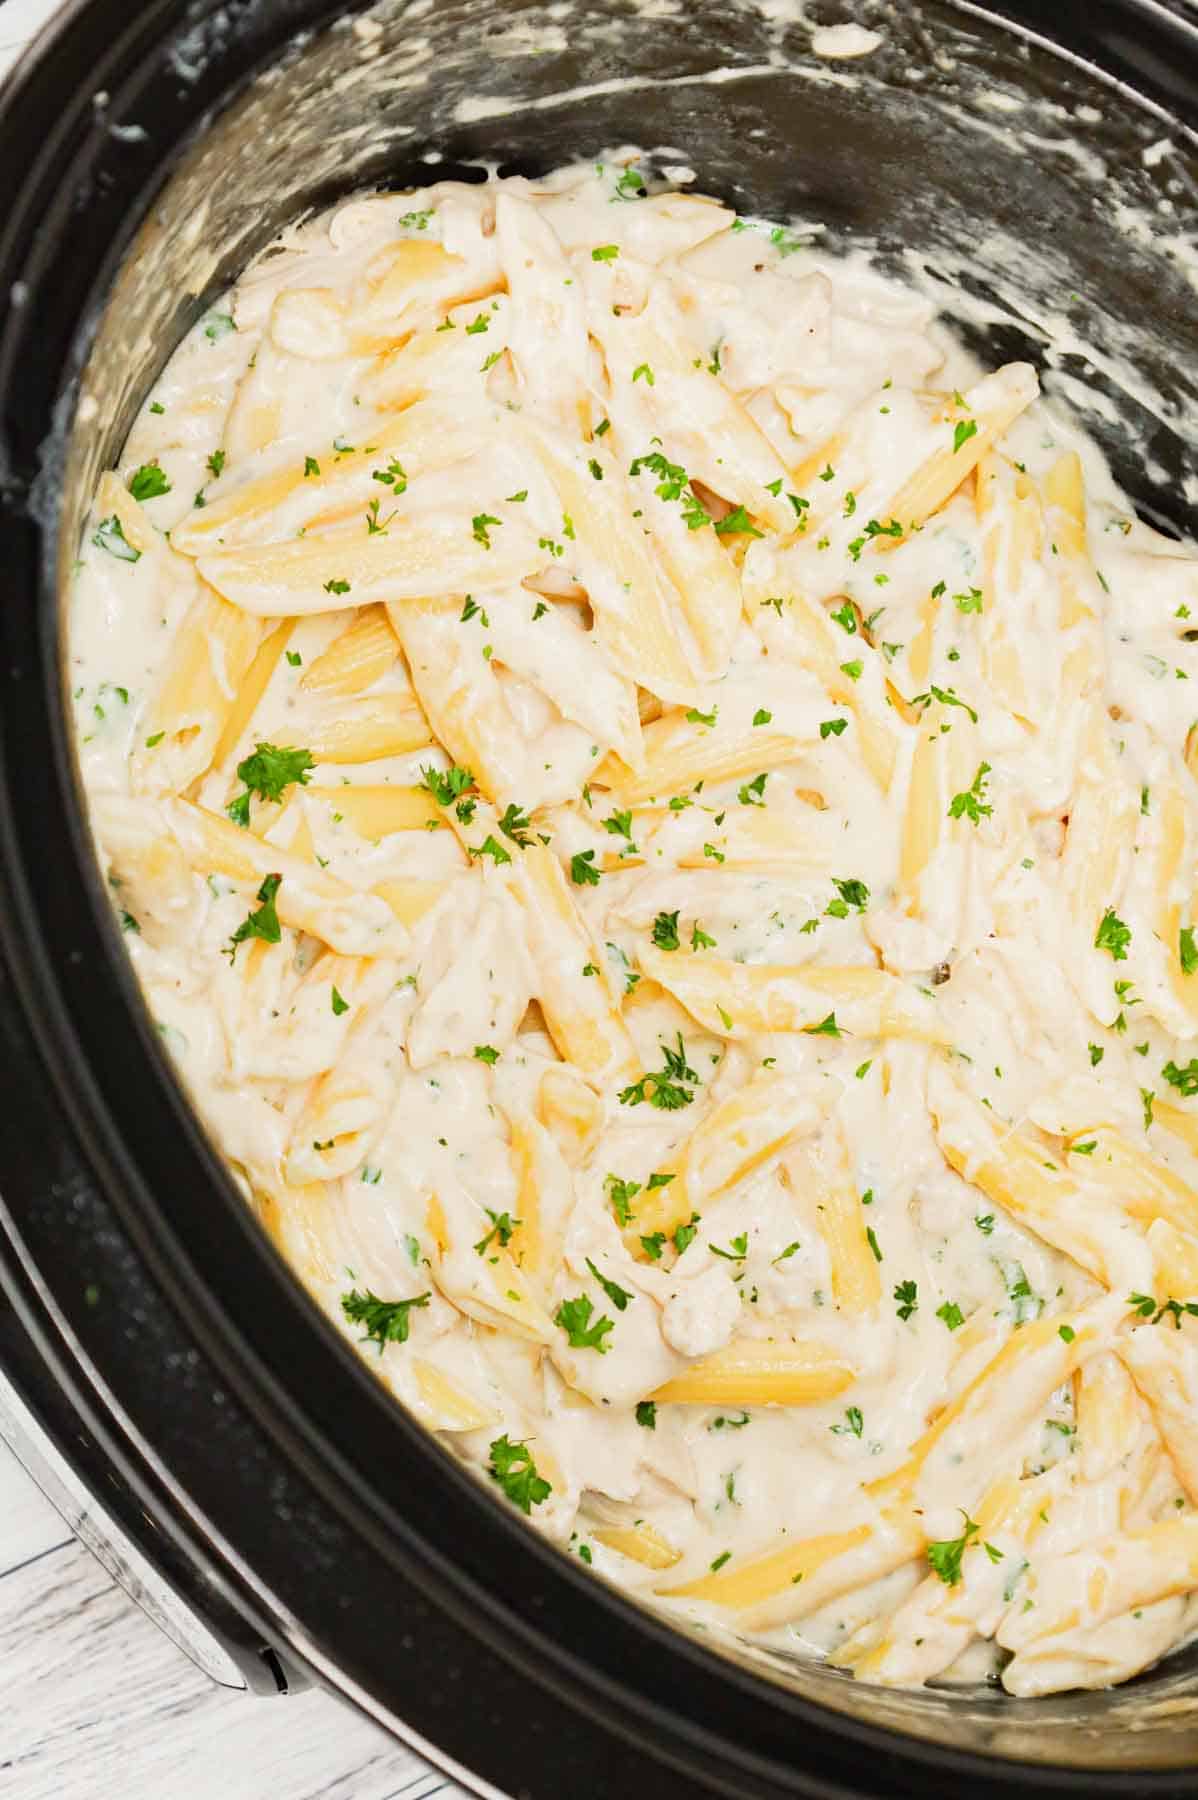 Crock Pot Garlic Parmesan Chicken Pasta is a creamy slow cooker pasta recipe loaded with cream cheese, garlic parmesan wing sauce, mozzarella, parmesan and shredded chicken breasts.